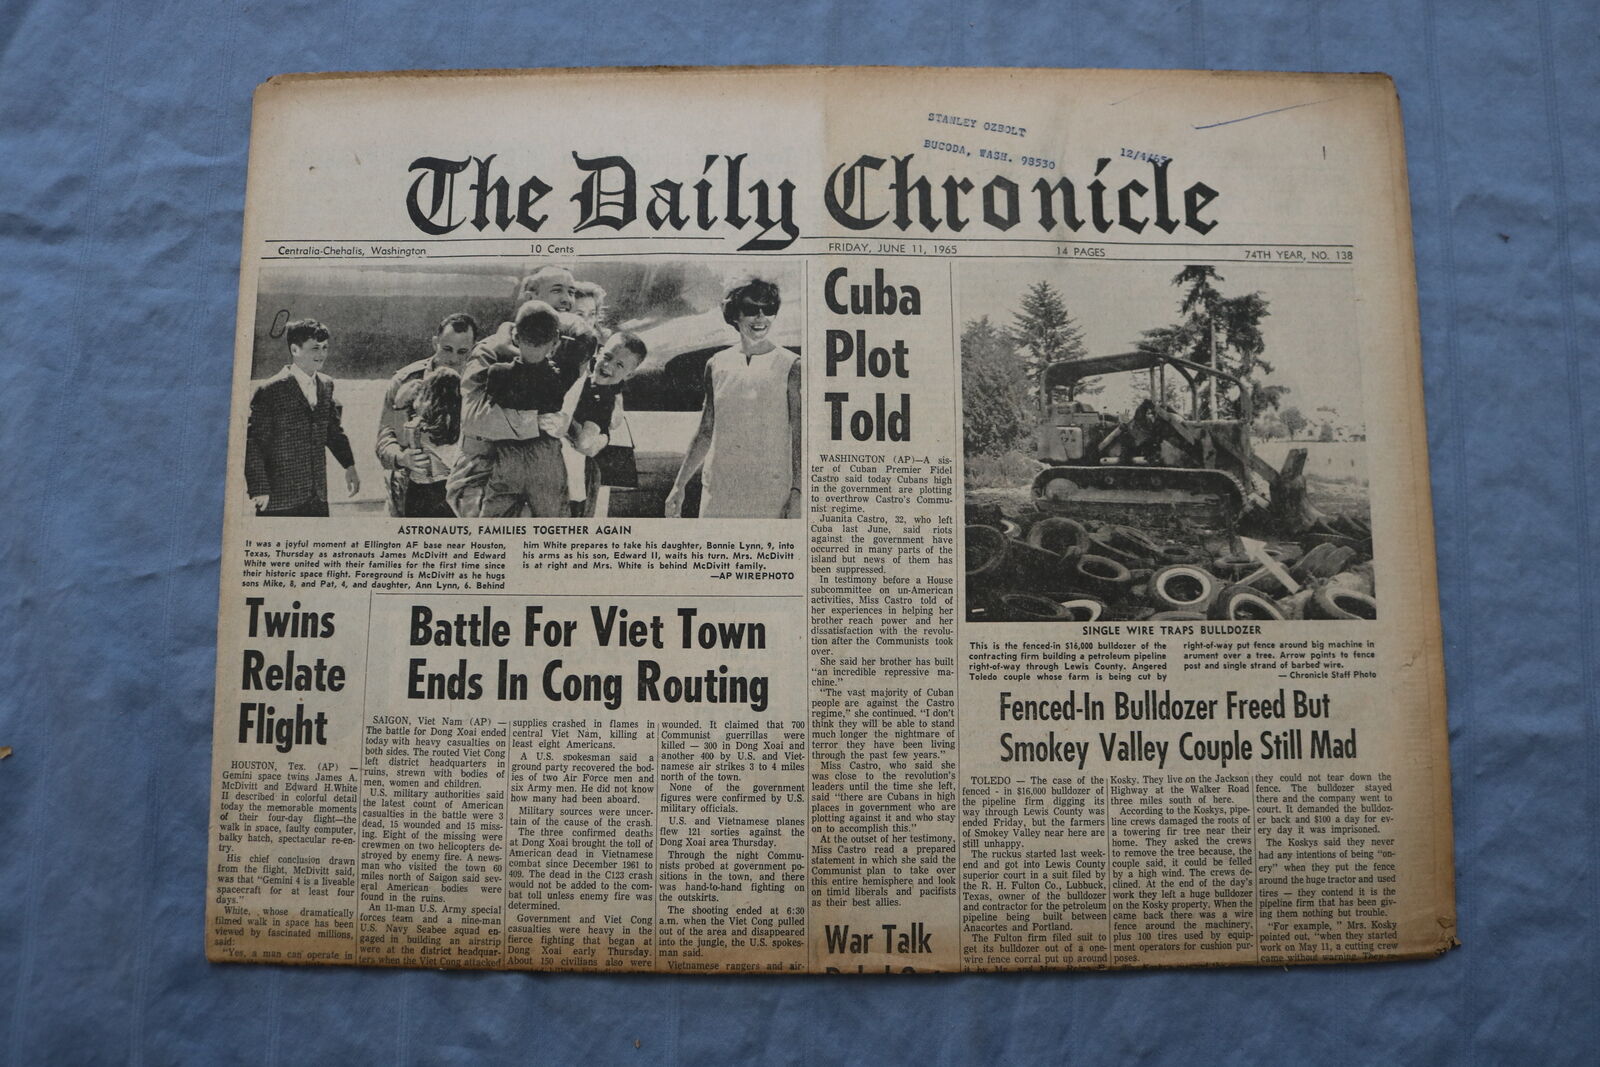 1965 JUNE 11 THE DAILY CHRONICLE NEWSPAPER - CUBA PLOT TOLD - NP 8521